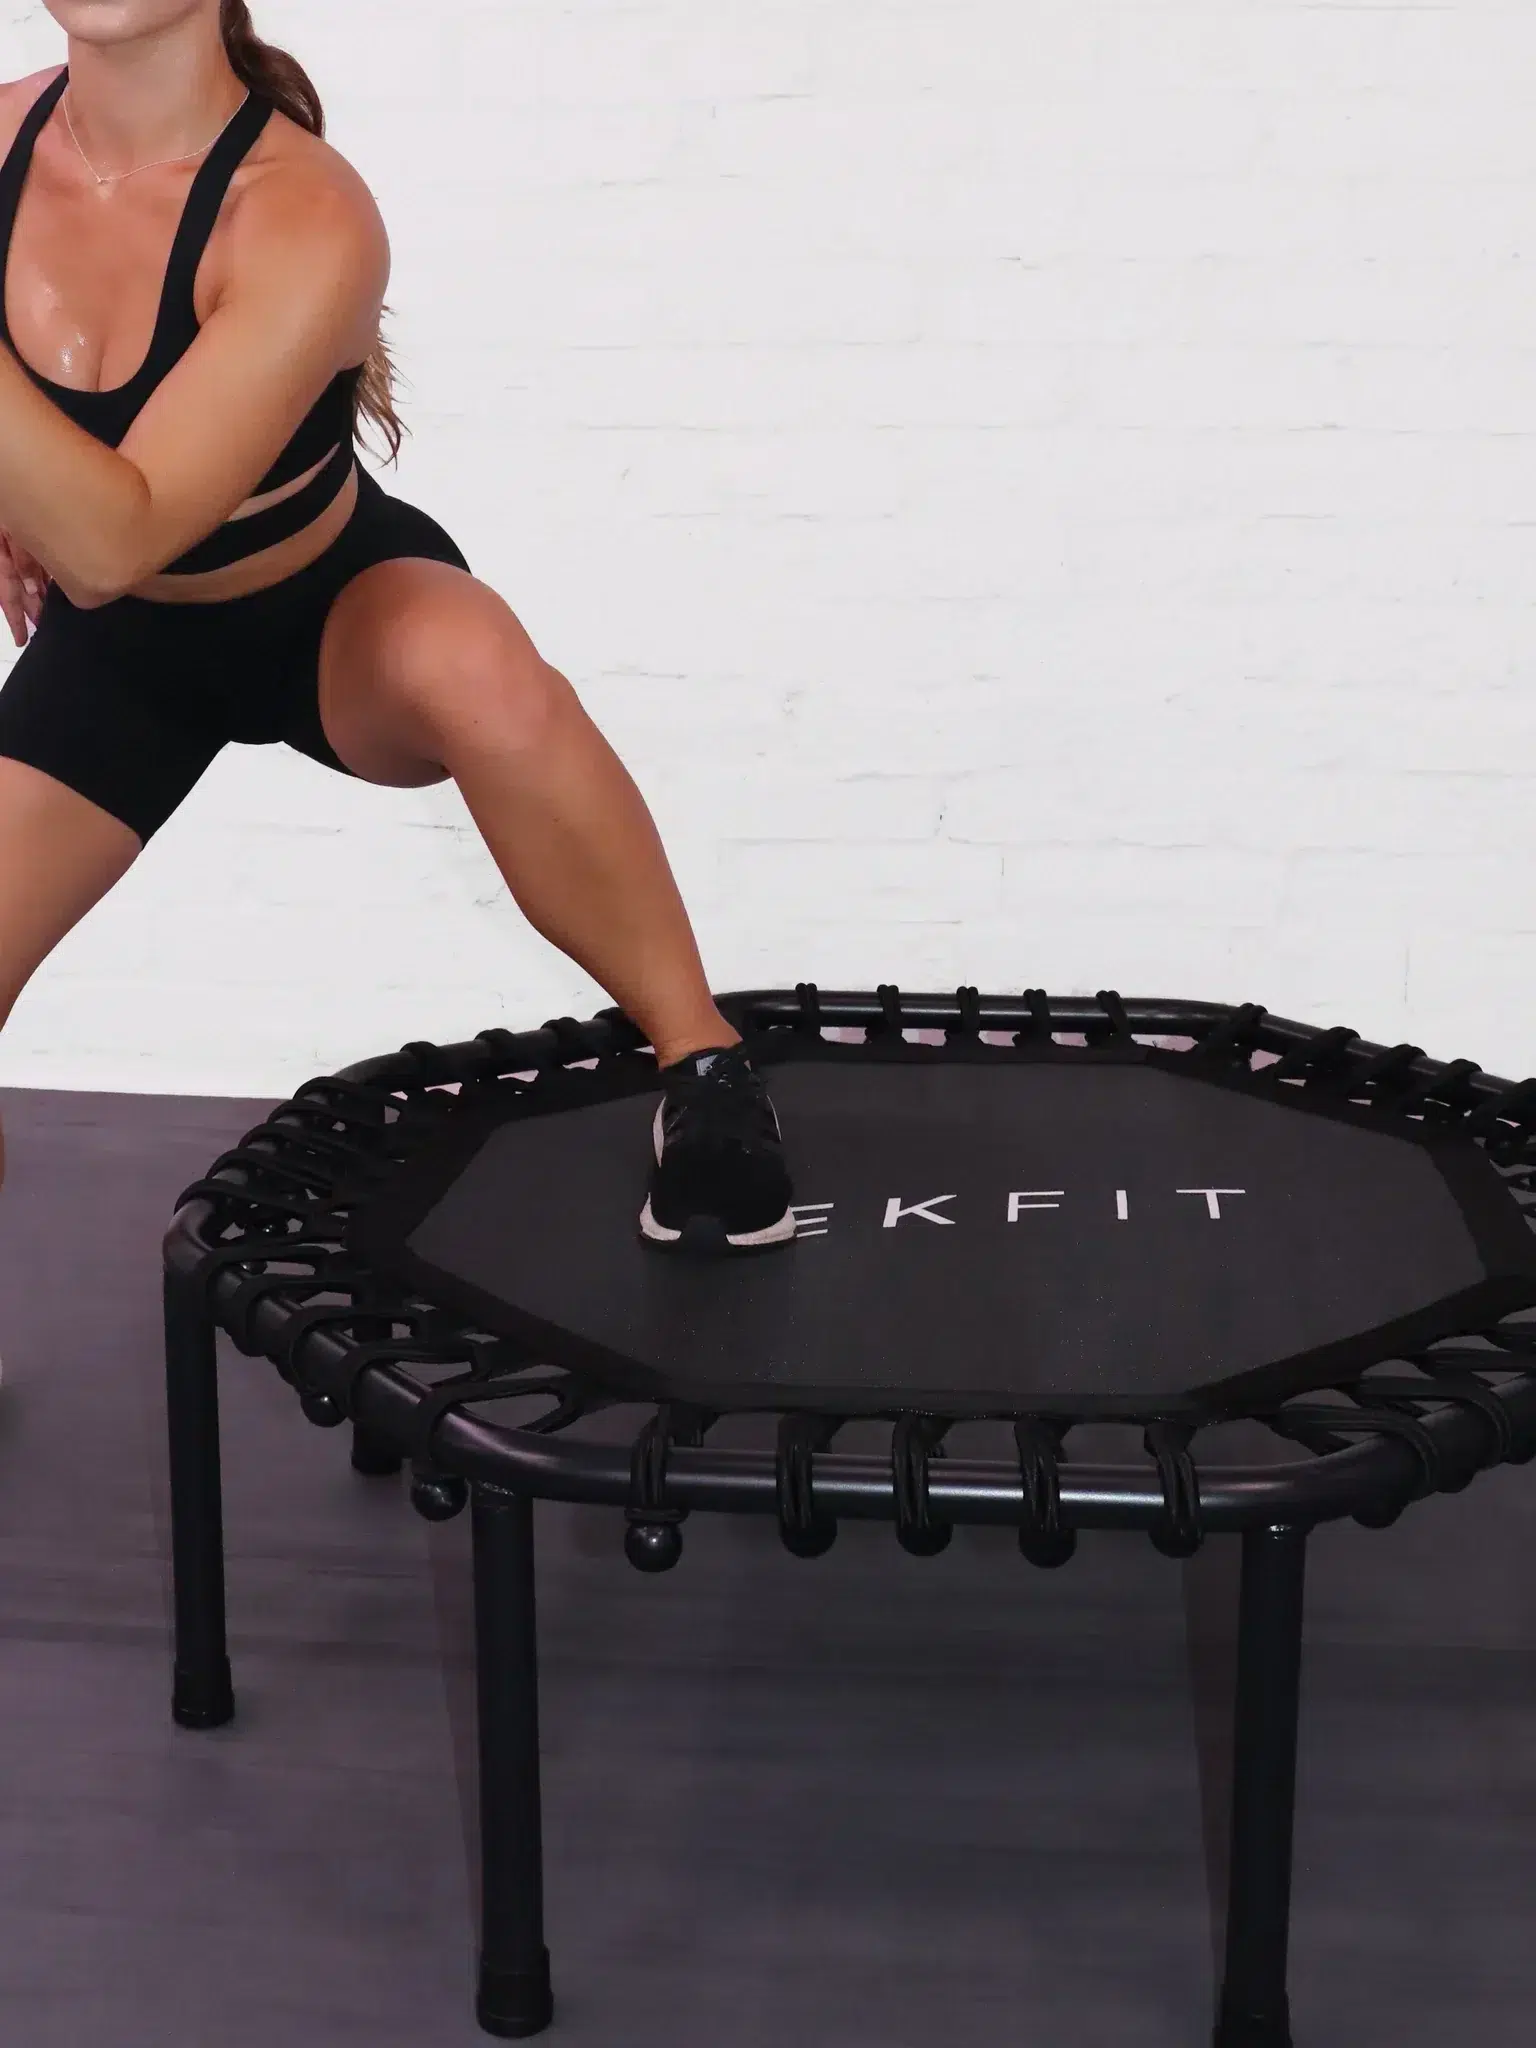 A model with a rebounder trampoline from Lekfit